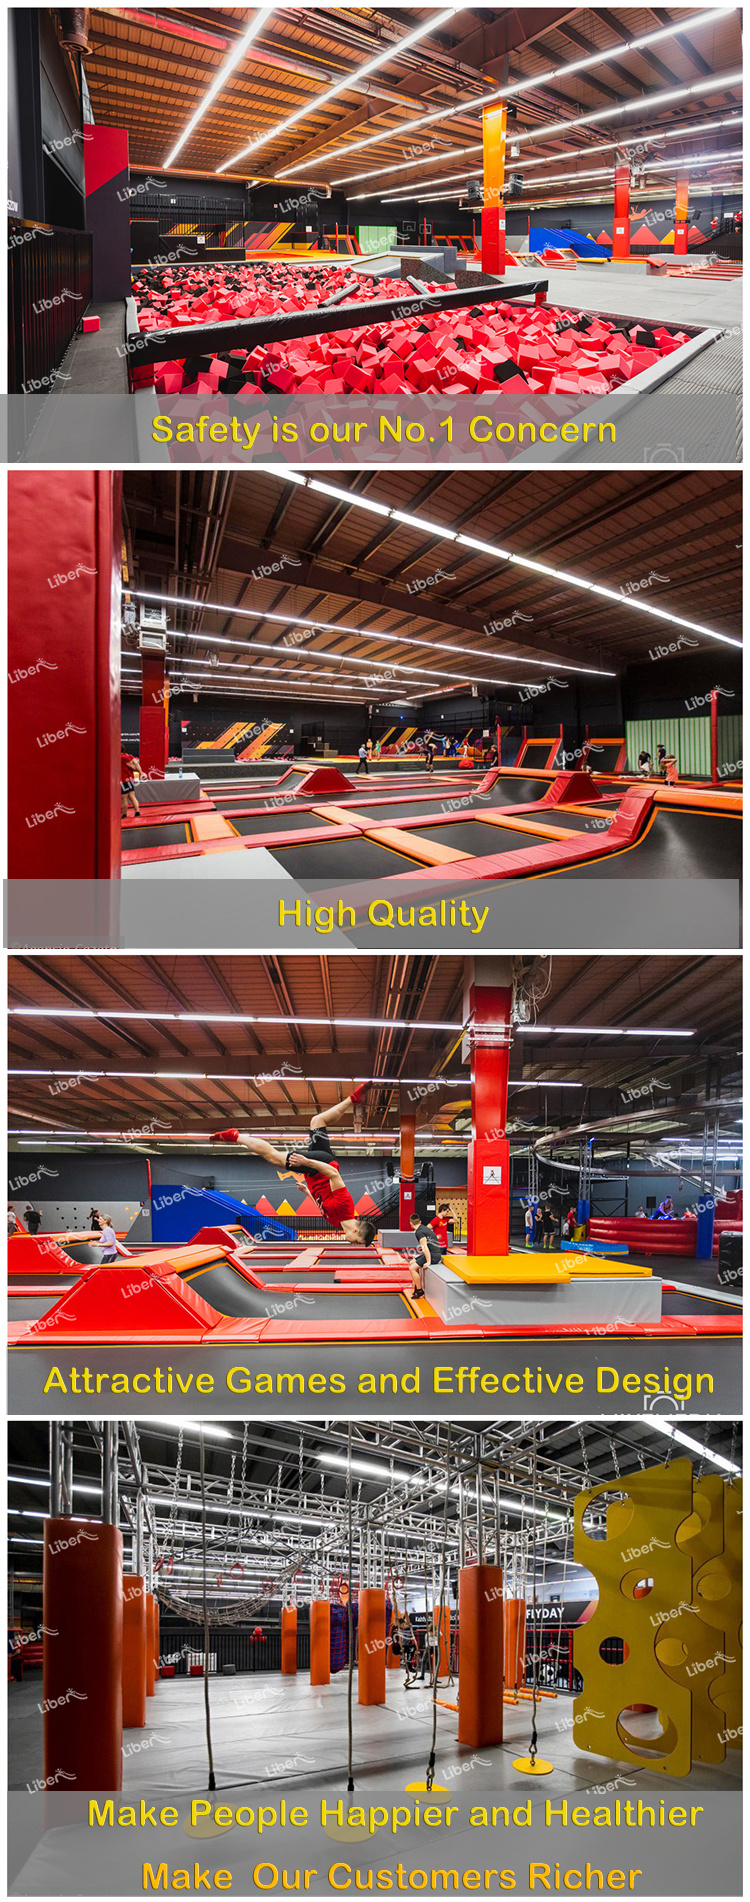 Commercial Trampoline Park with Ninja Course and Sky Coaster